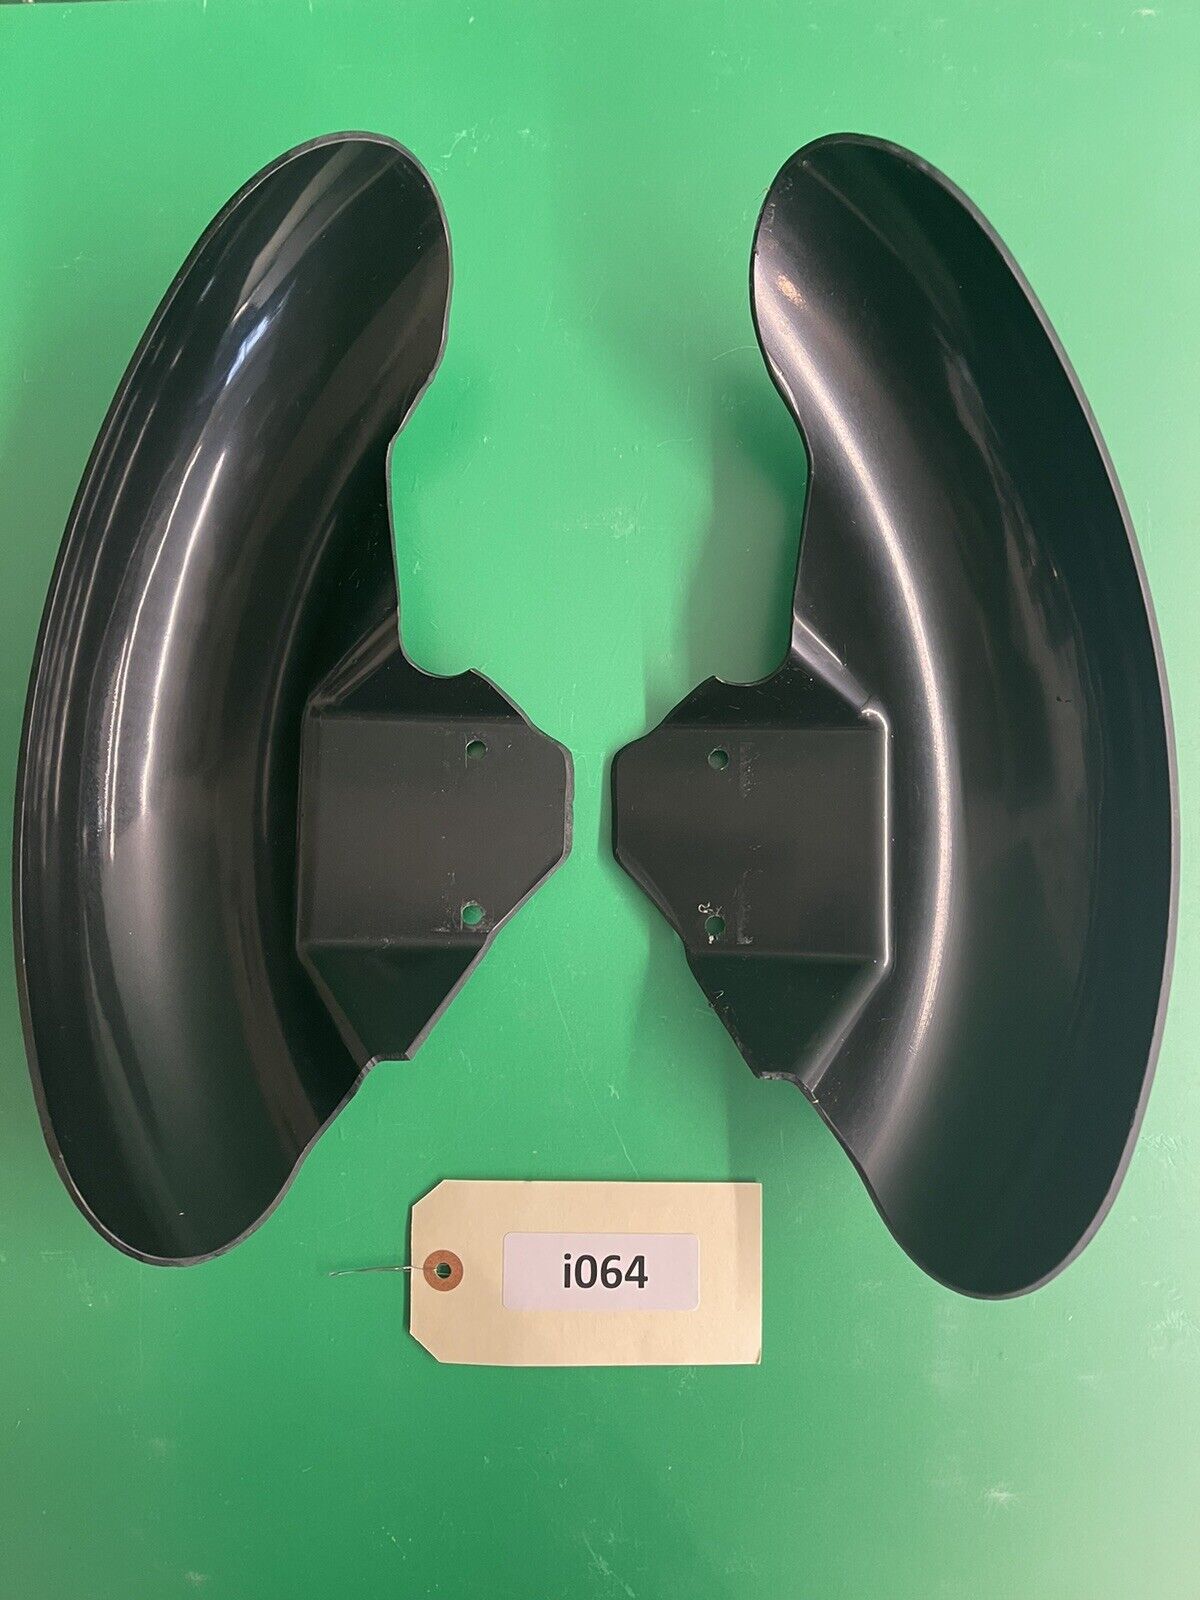 Set of 2 Fenders for the Quickie S-646 & Quickie S-636 Power Wheelchairs #i064